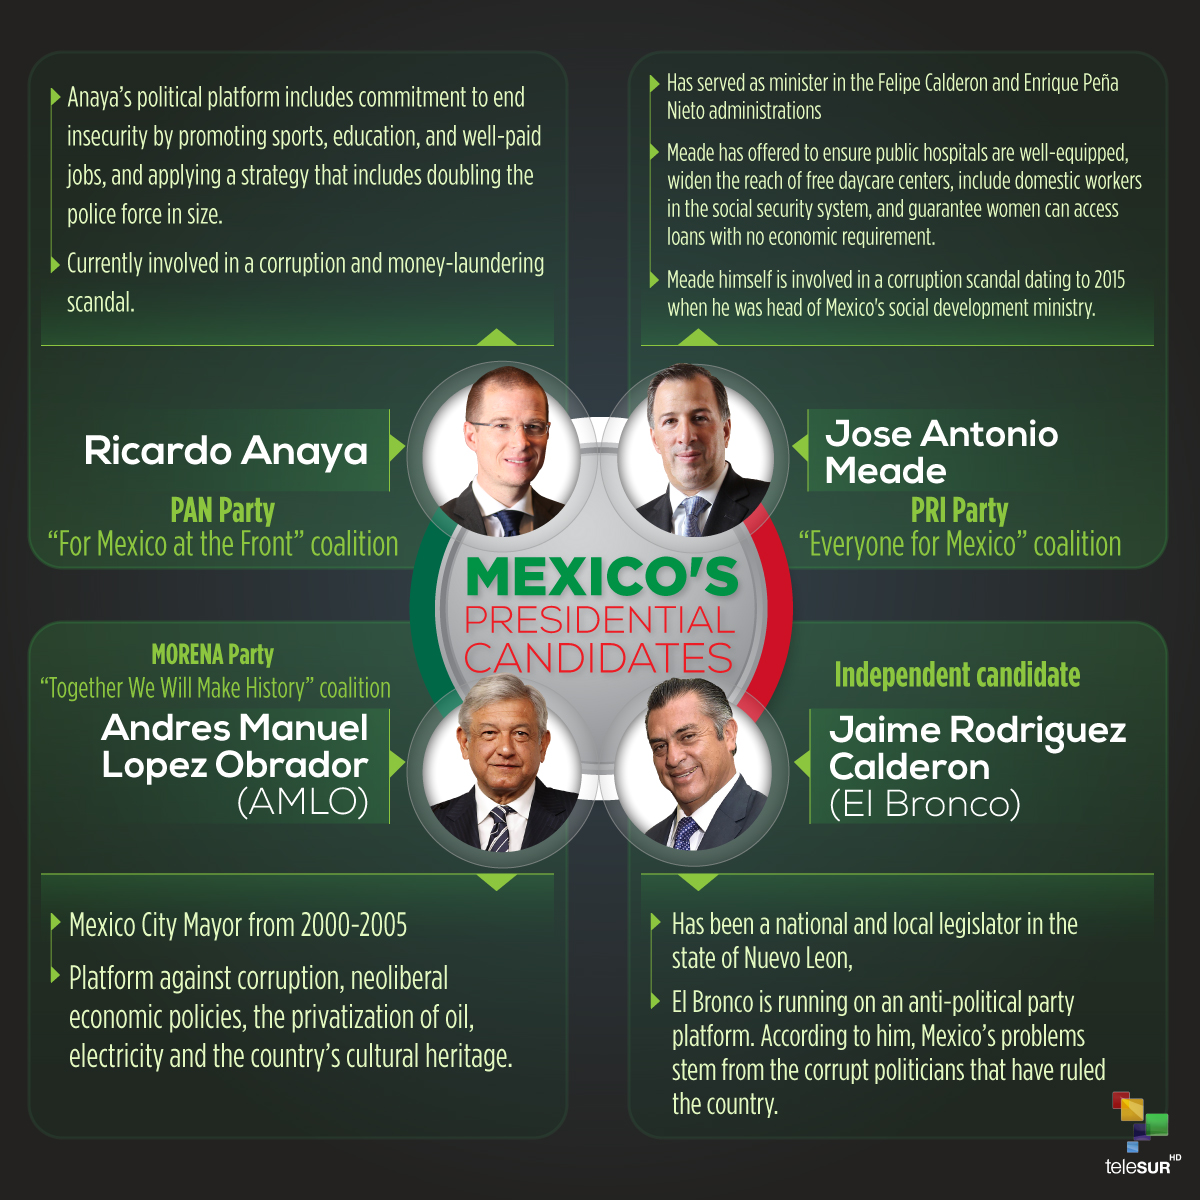 Mexico's Presidential Candidates